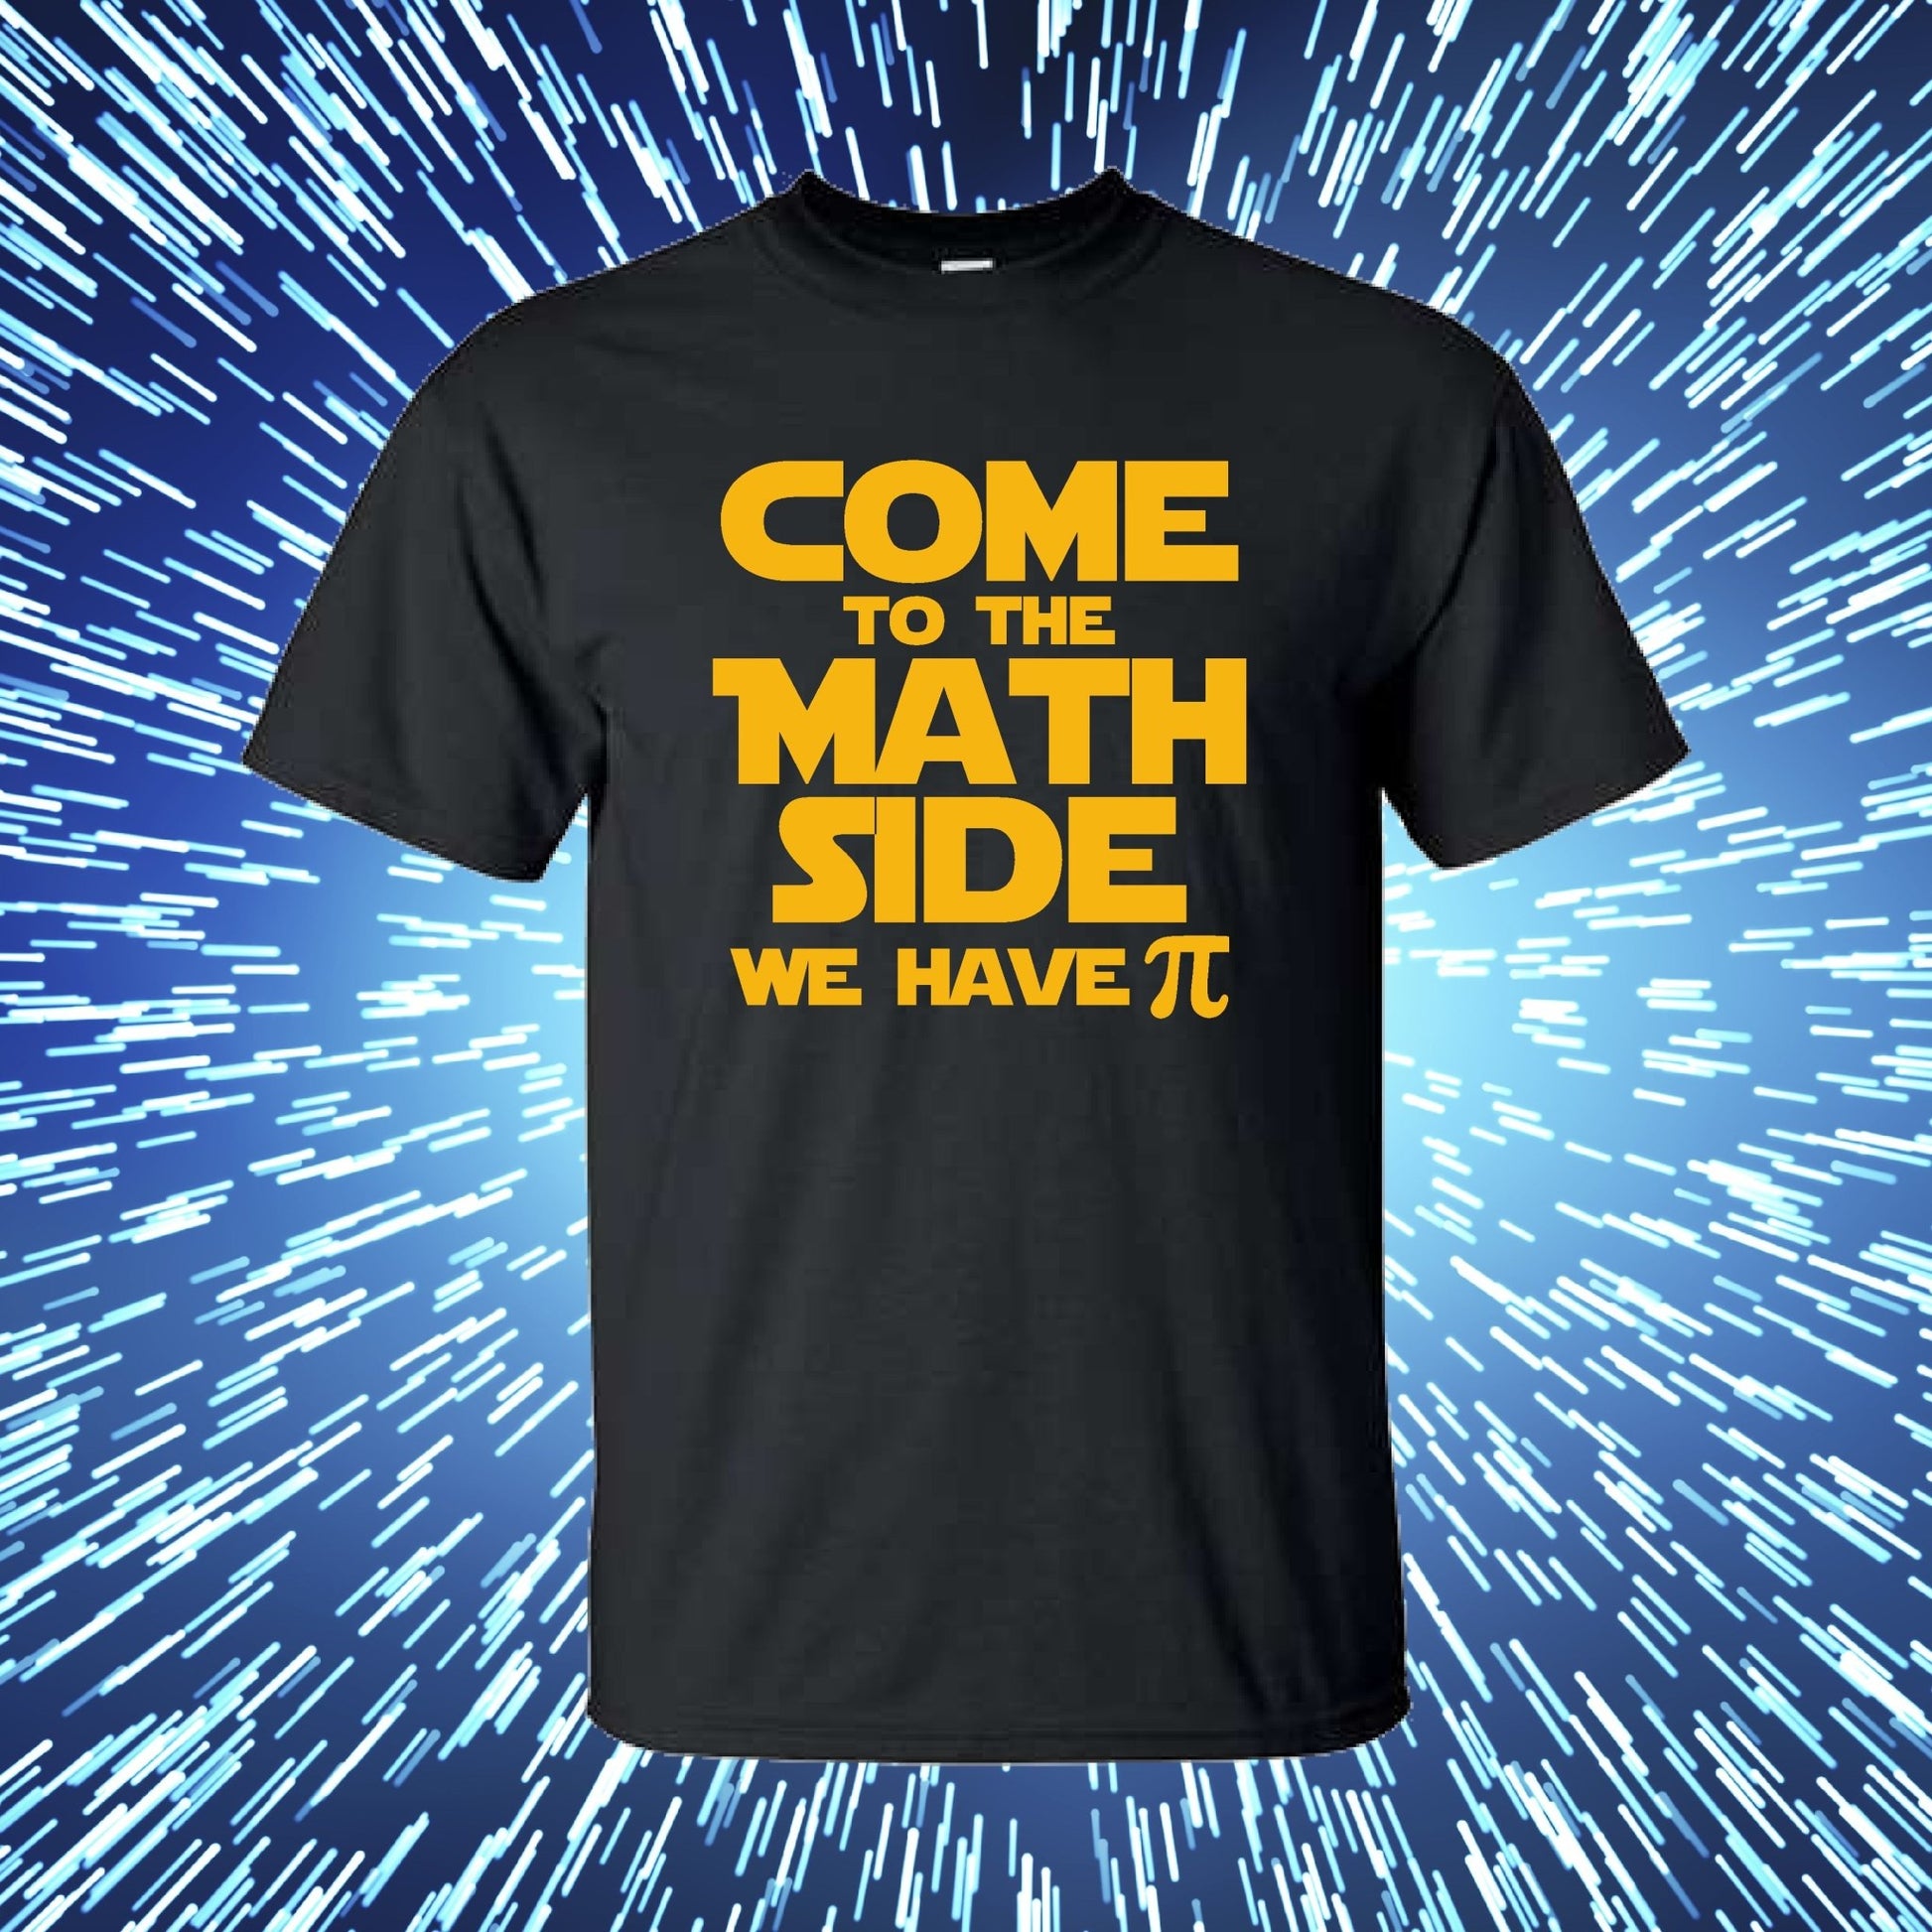 Come to the Math Side we have Pi T shirt (Youth or Adult) - SBS T Shop